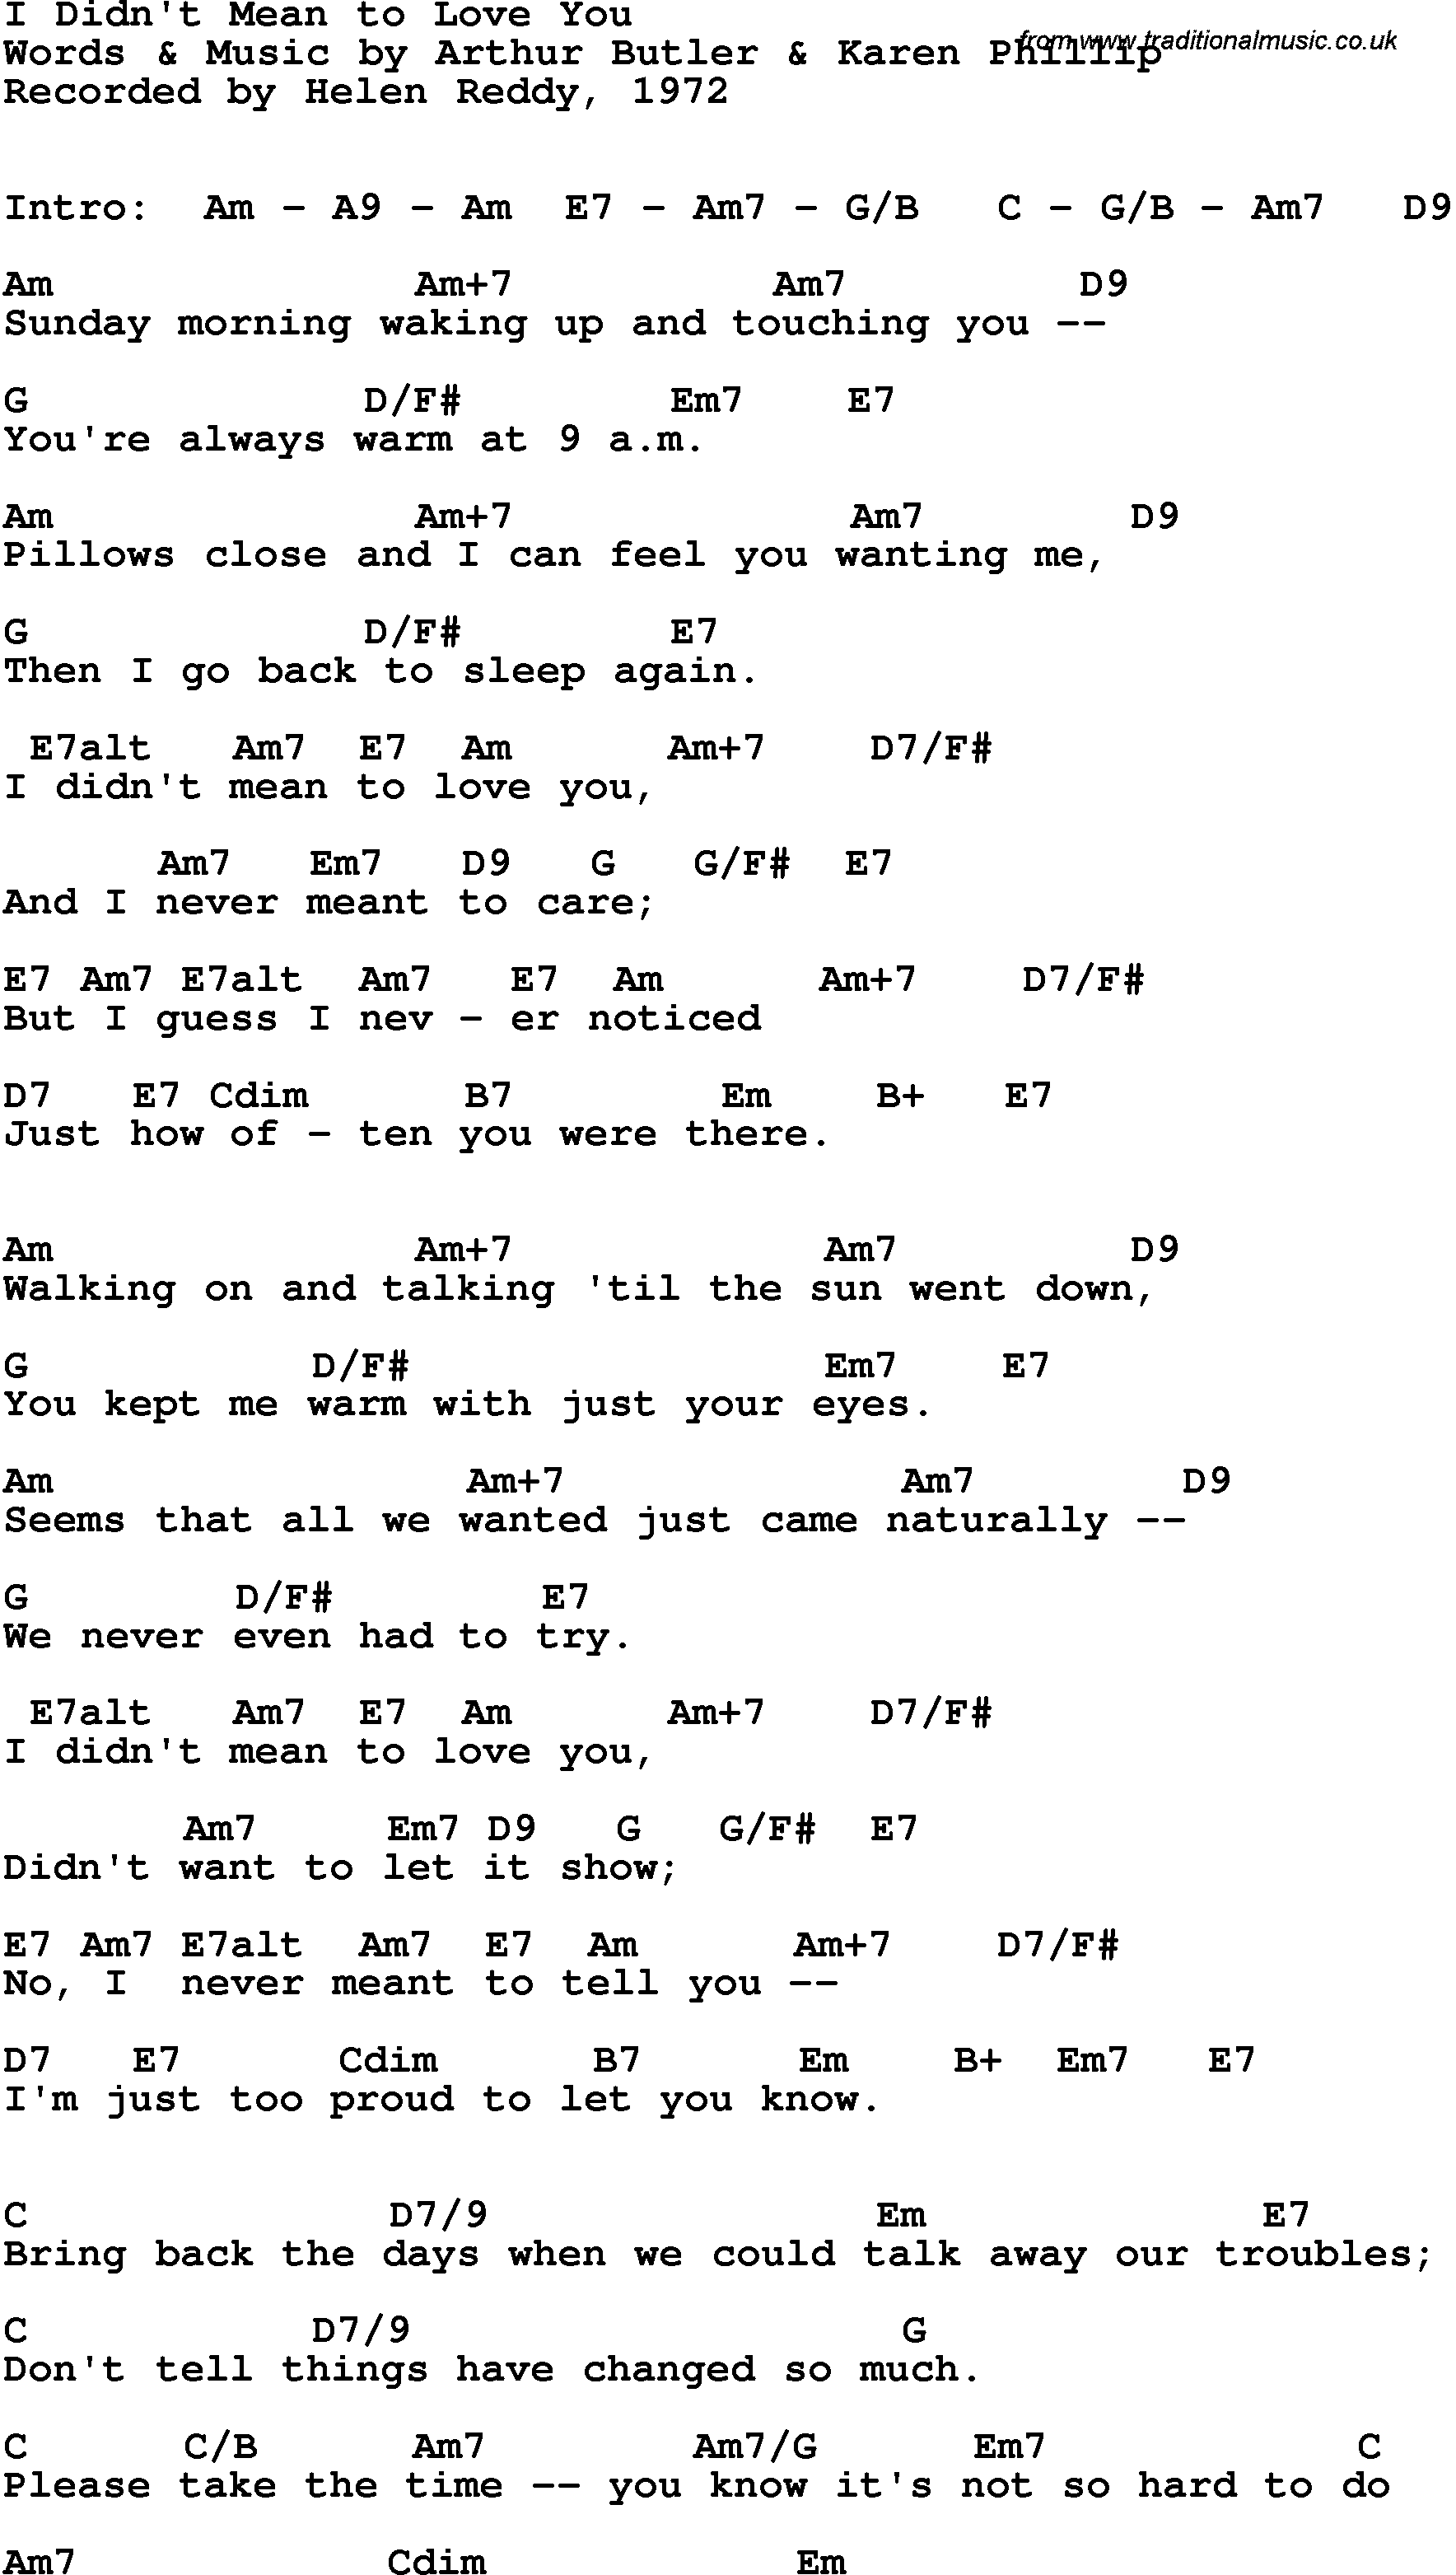 Song Lyrics with guitar chords for I Didn't Mean To Love You - Helen Reddy, 1972